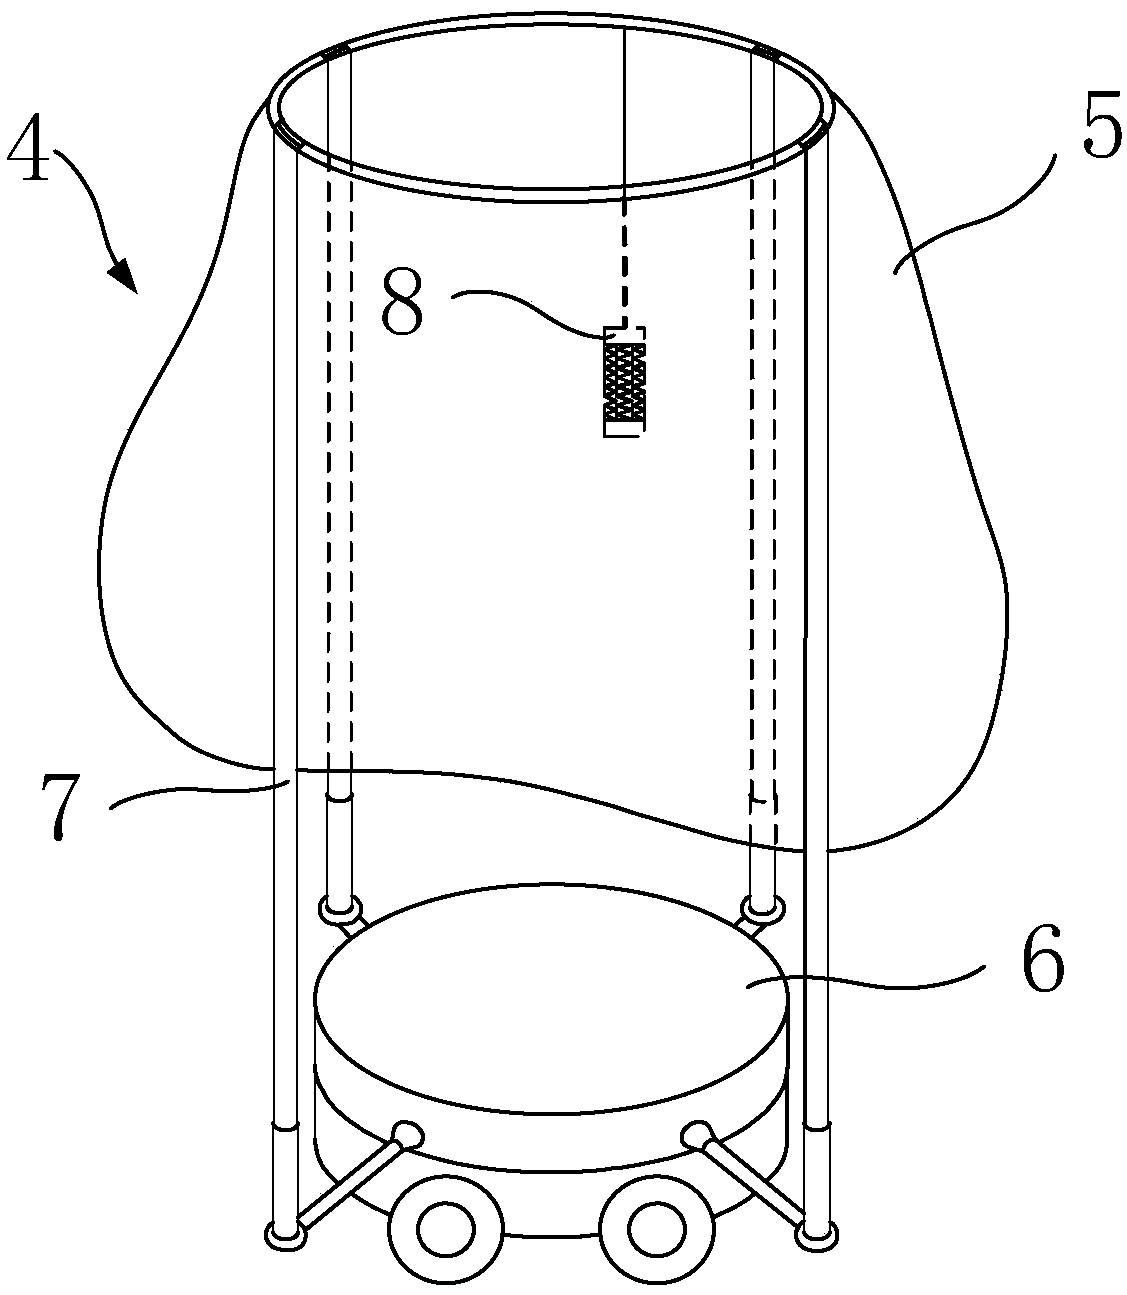 Removing system and method for hornet nests